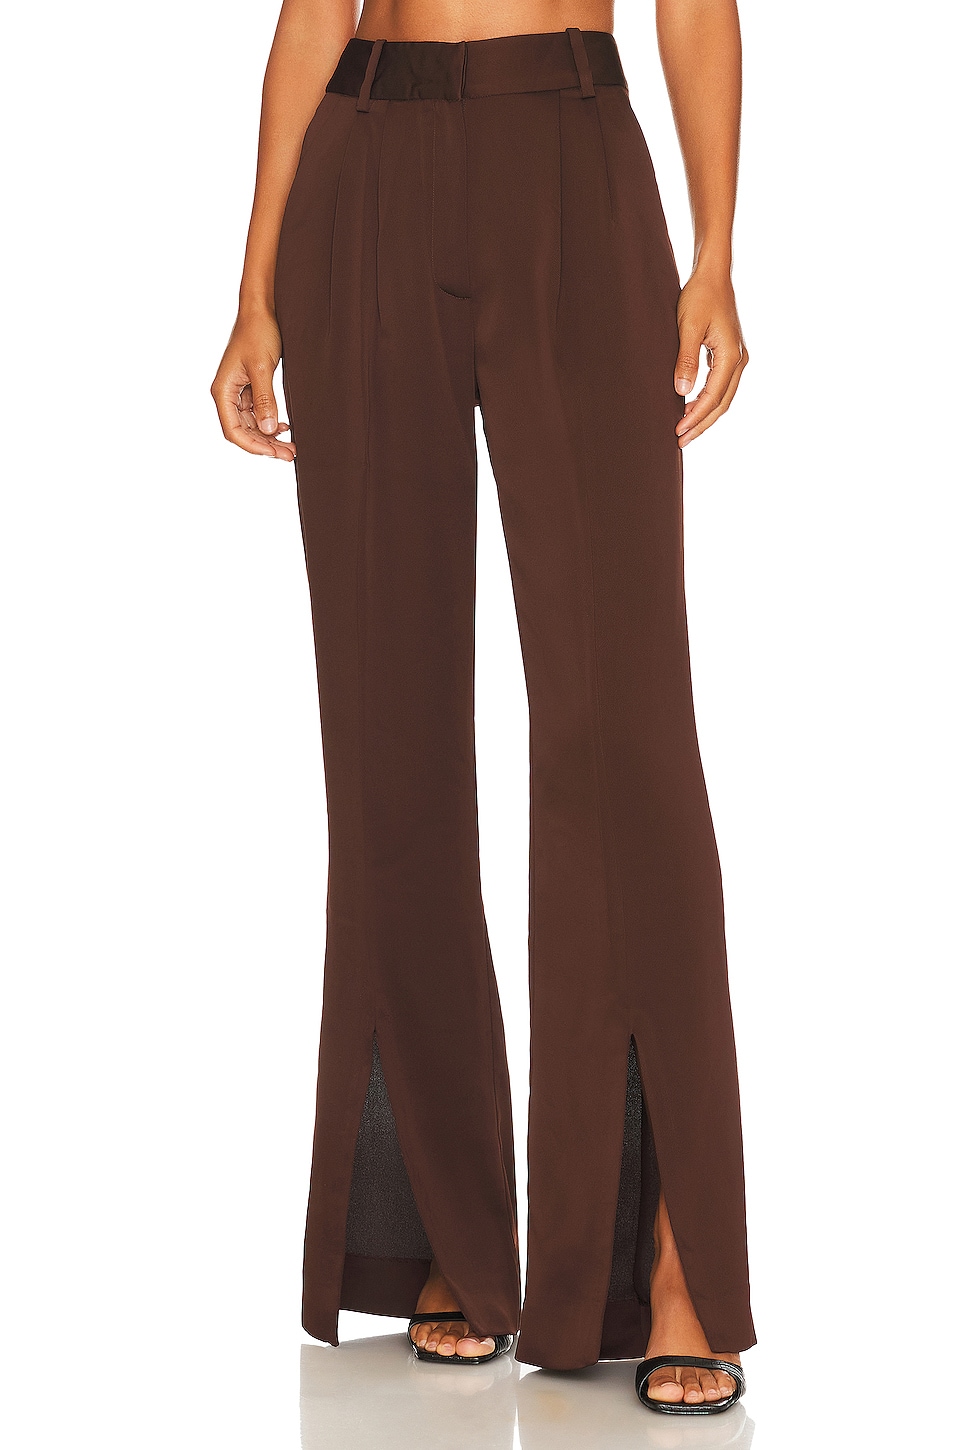 Favorite Daughter Favorite Pant with Slit in Chocolate | REVOLVE